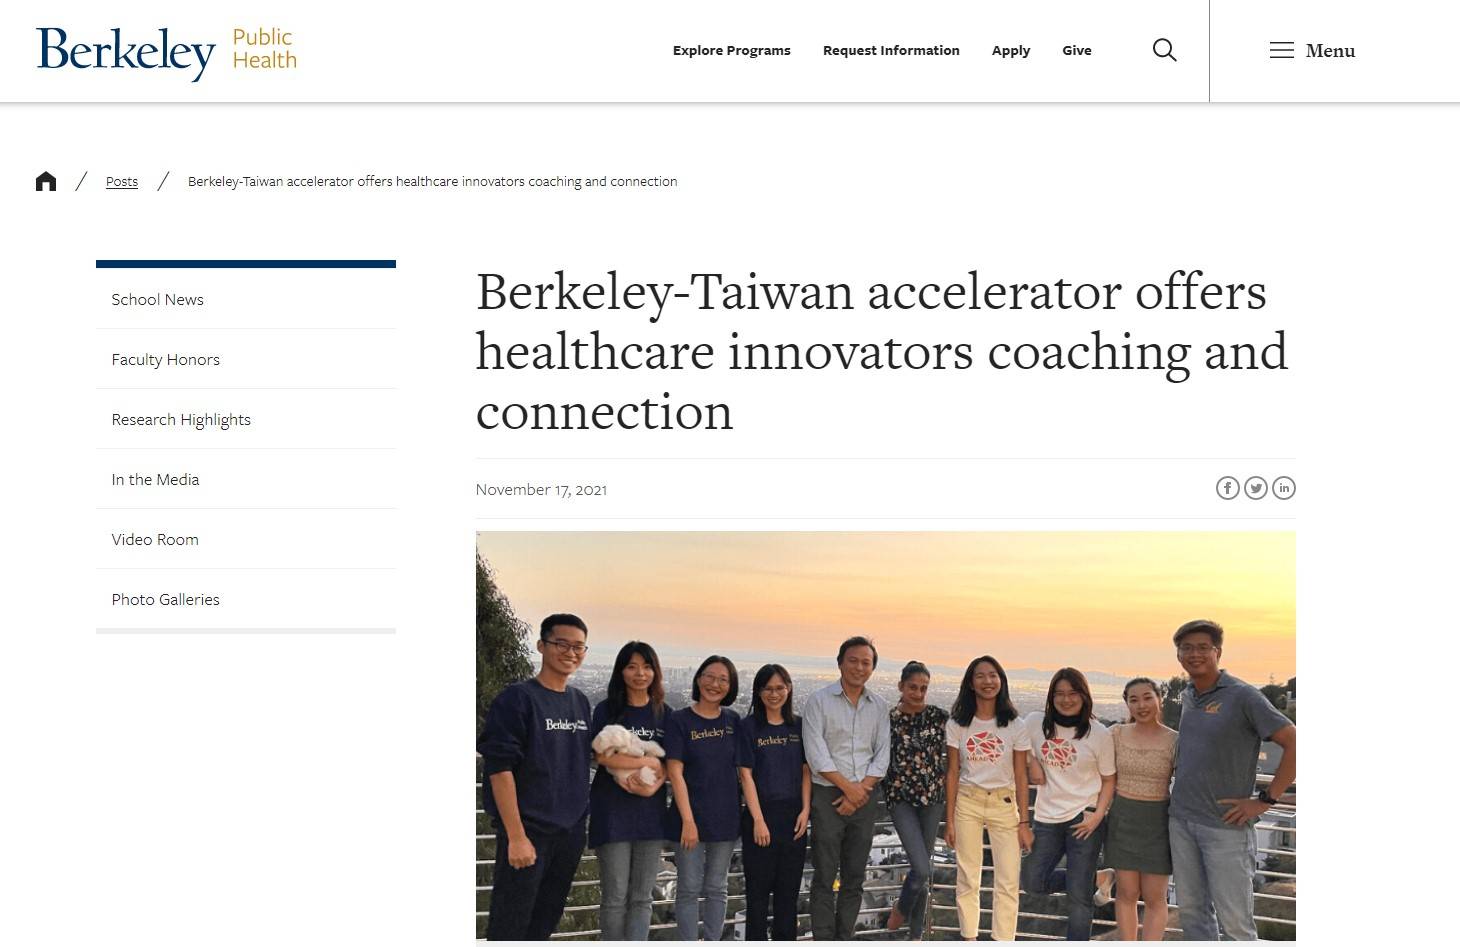 Berkeley-Taiwan accelerator offers healthcare innovators coaching and connection